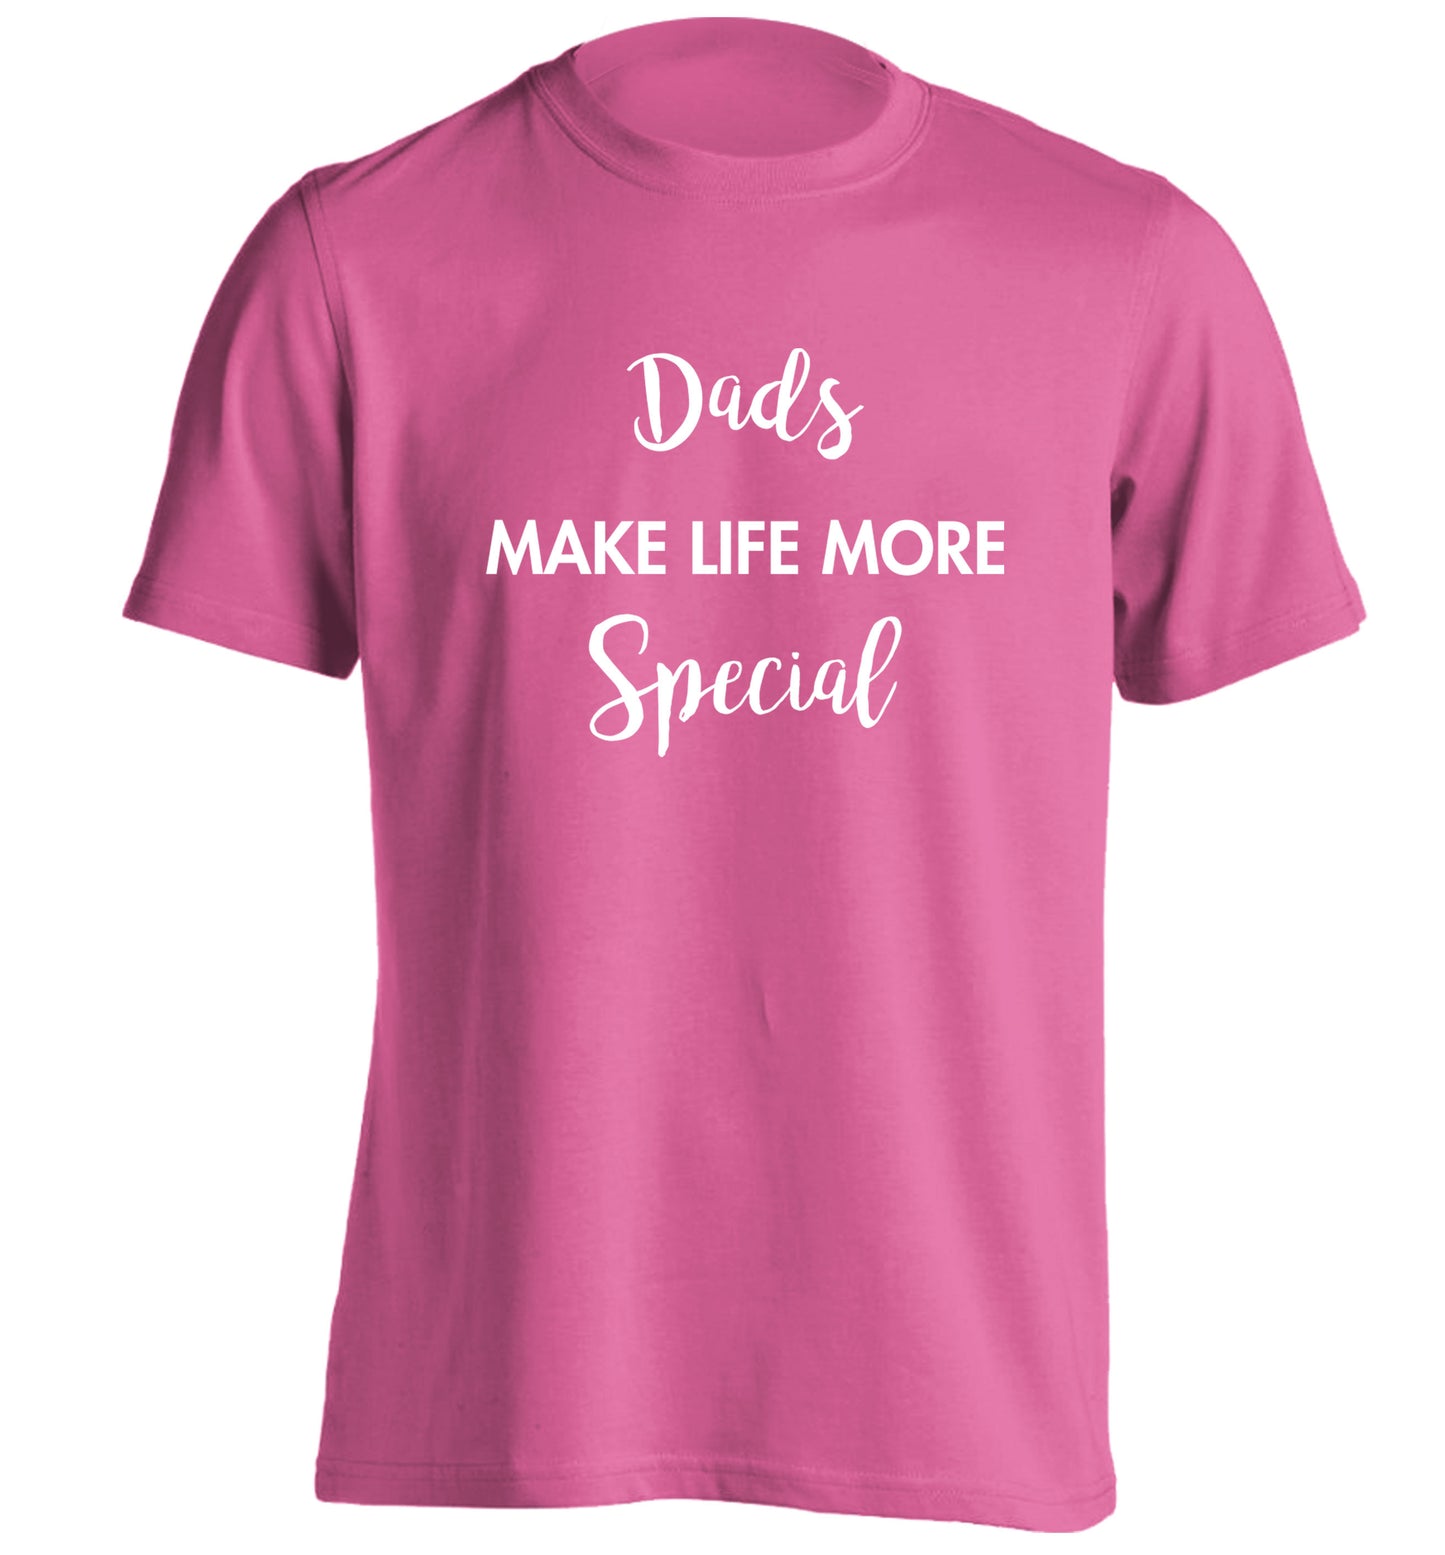 Dads make life more special adults unisex pink Tshirt 2XL